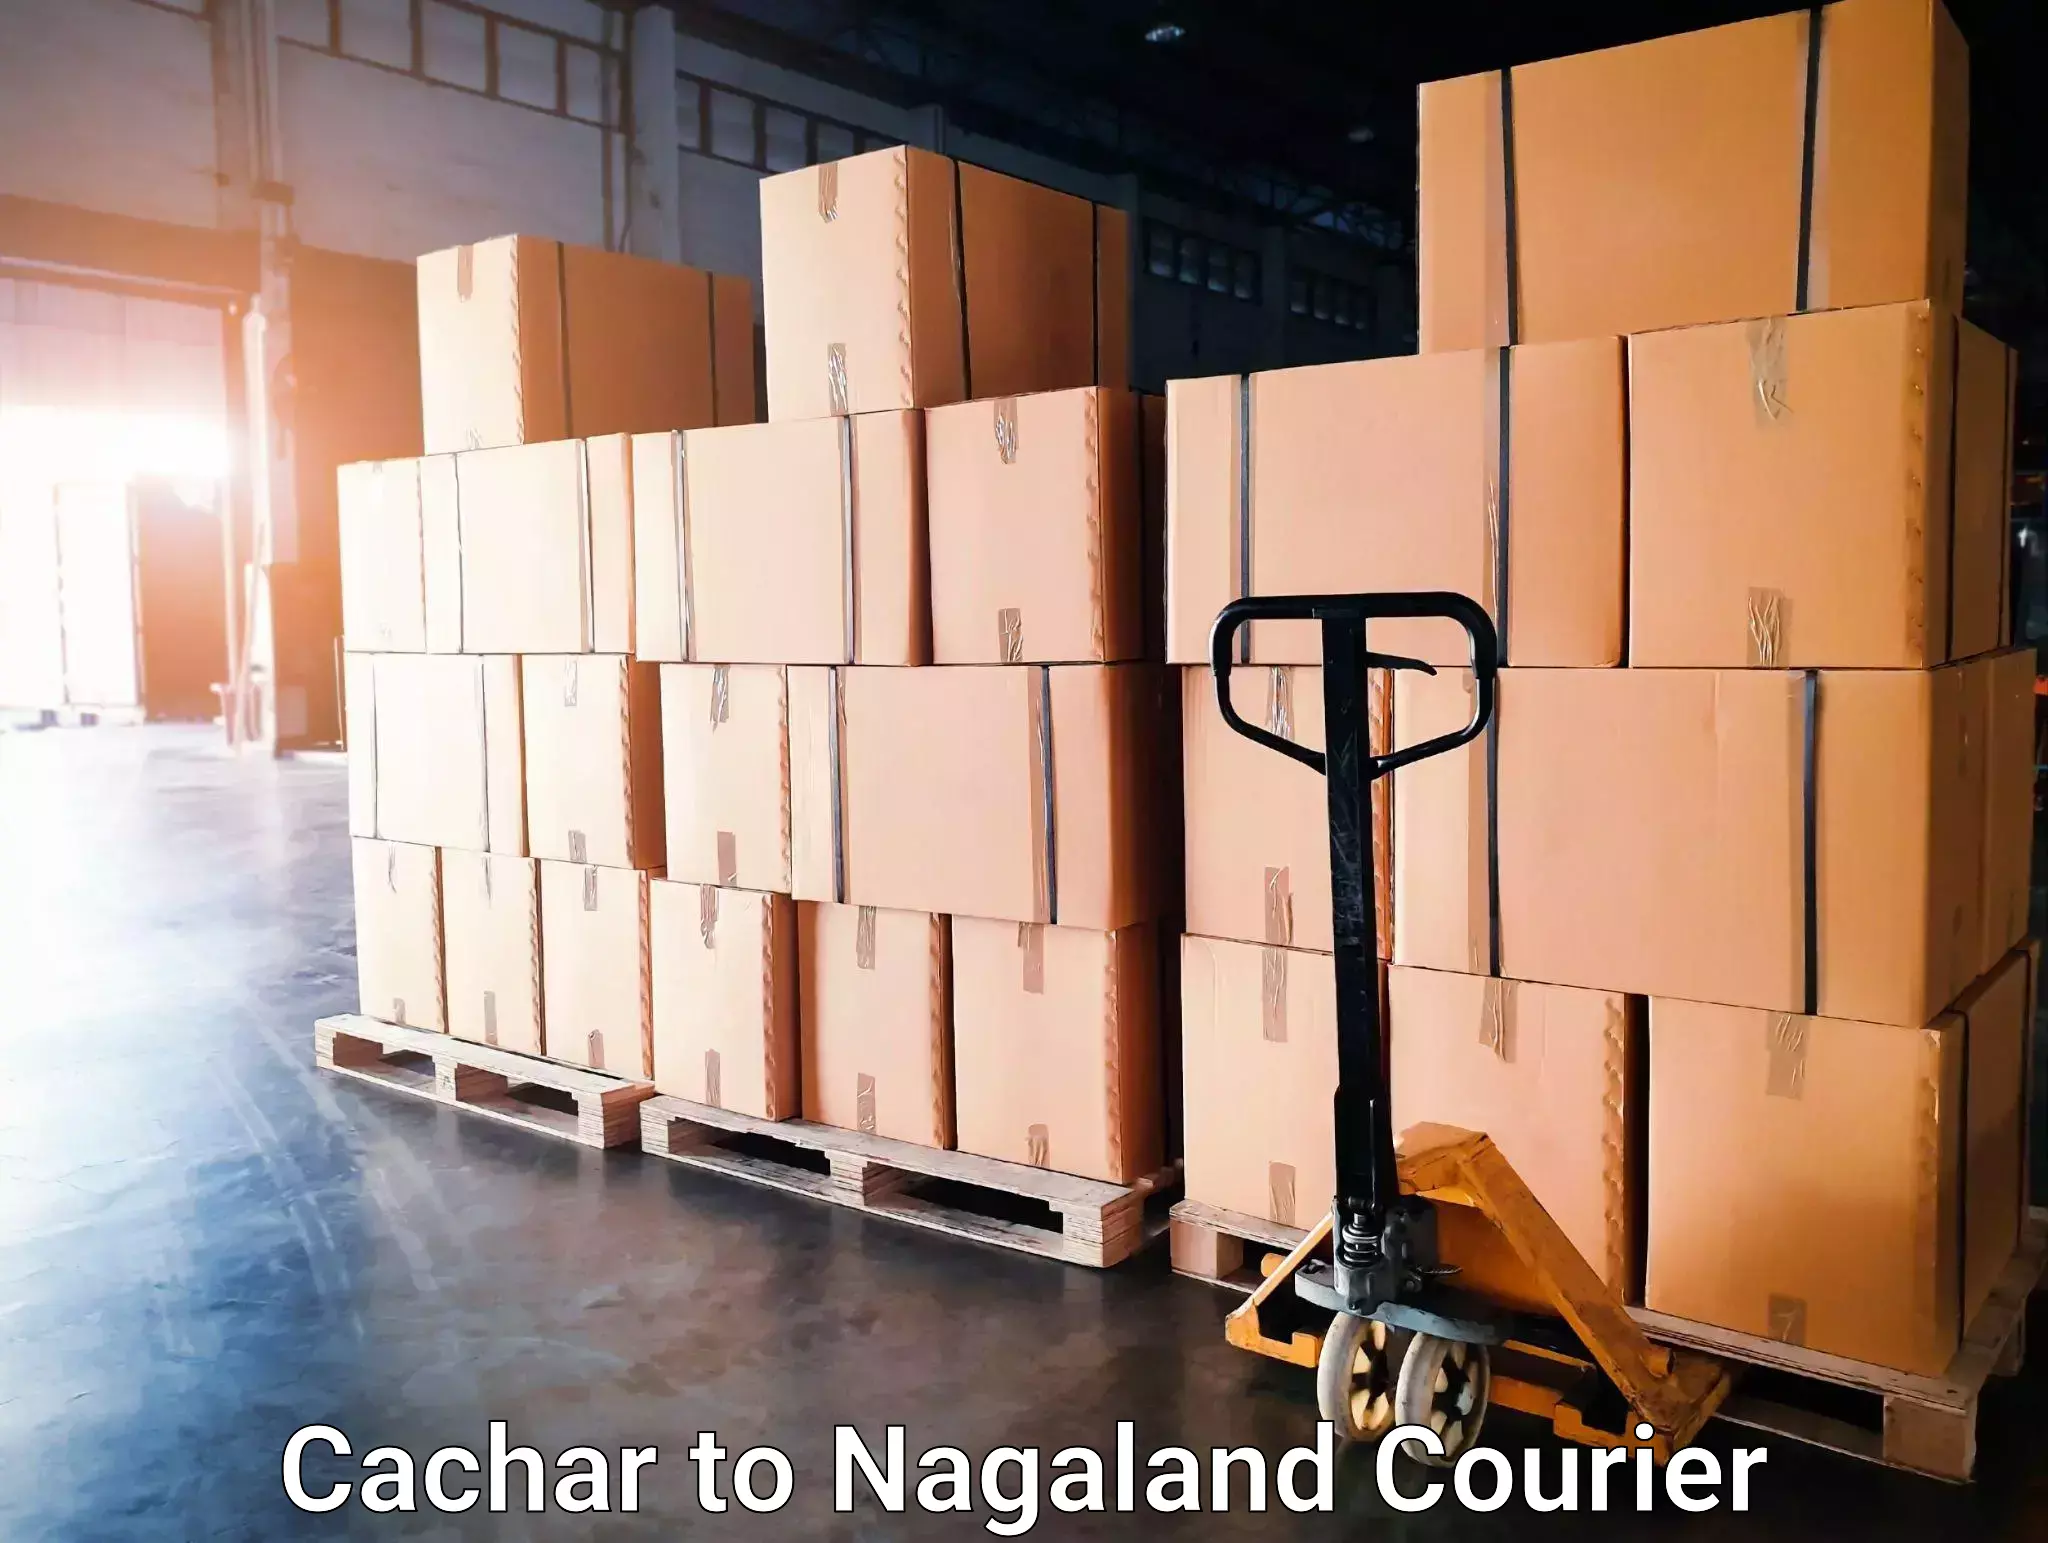 Sustainable shipping practices Cachar to Nagaland